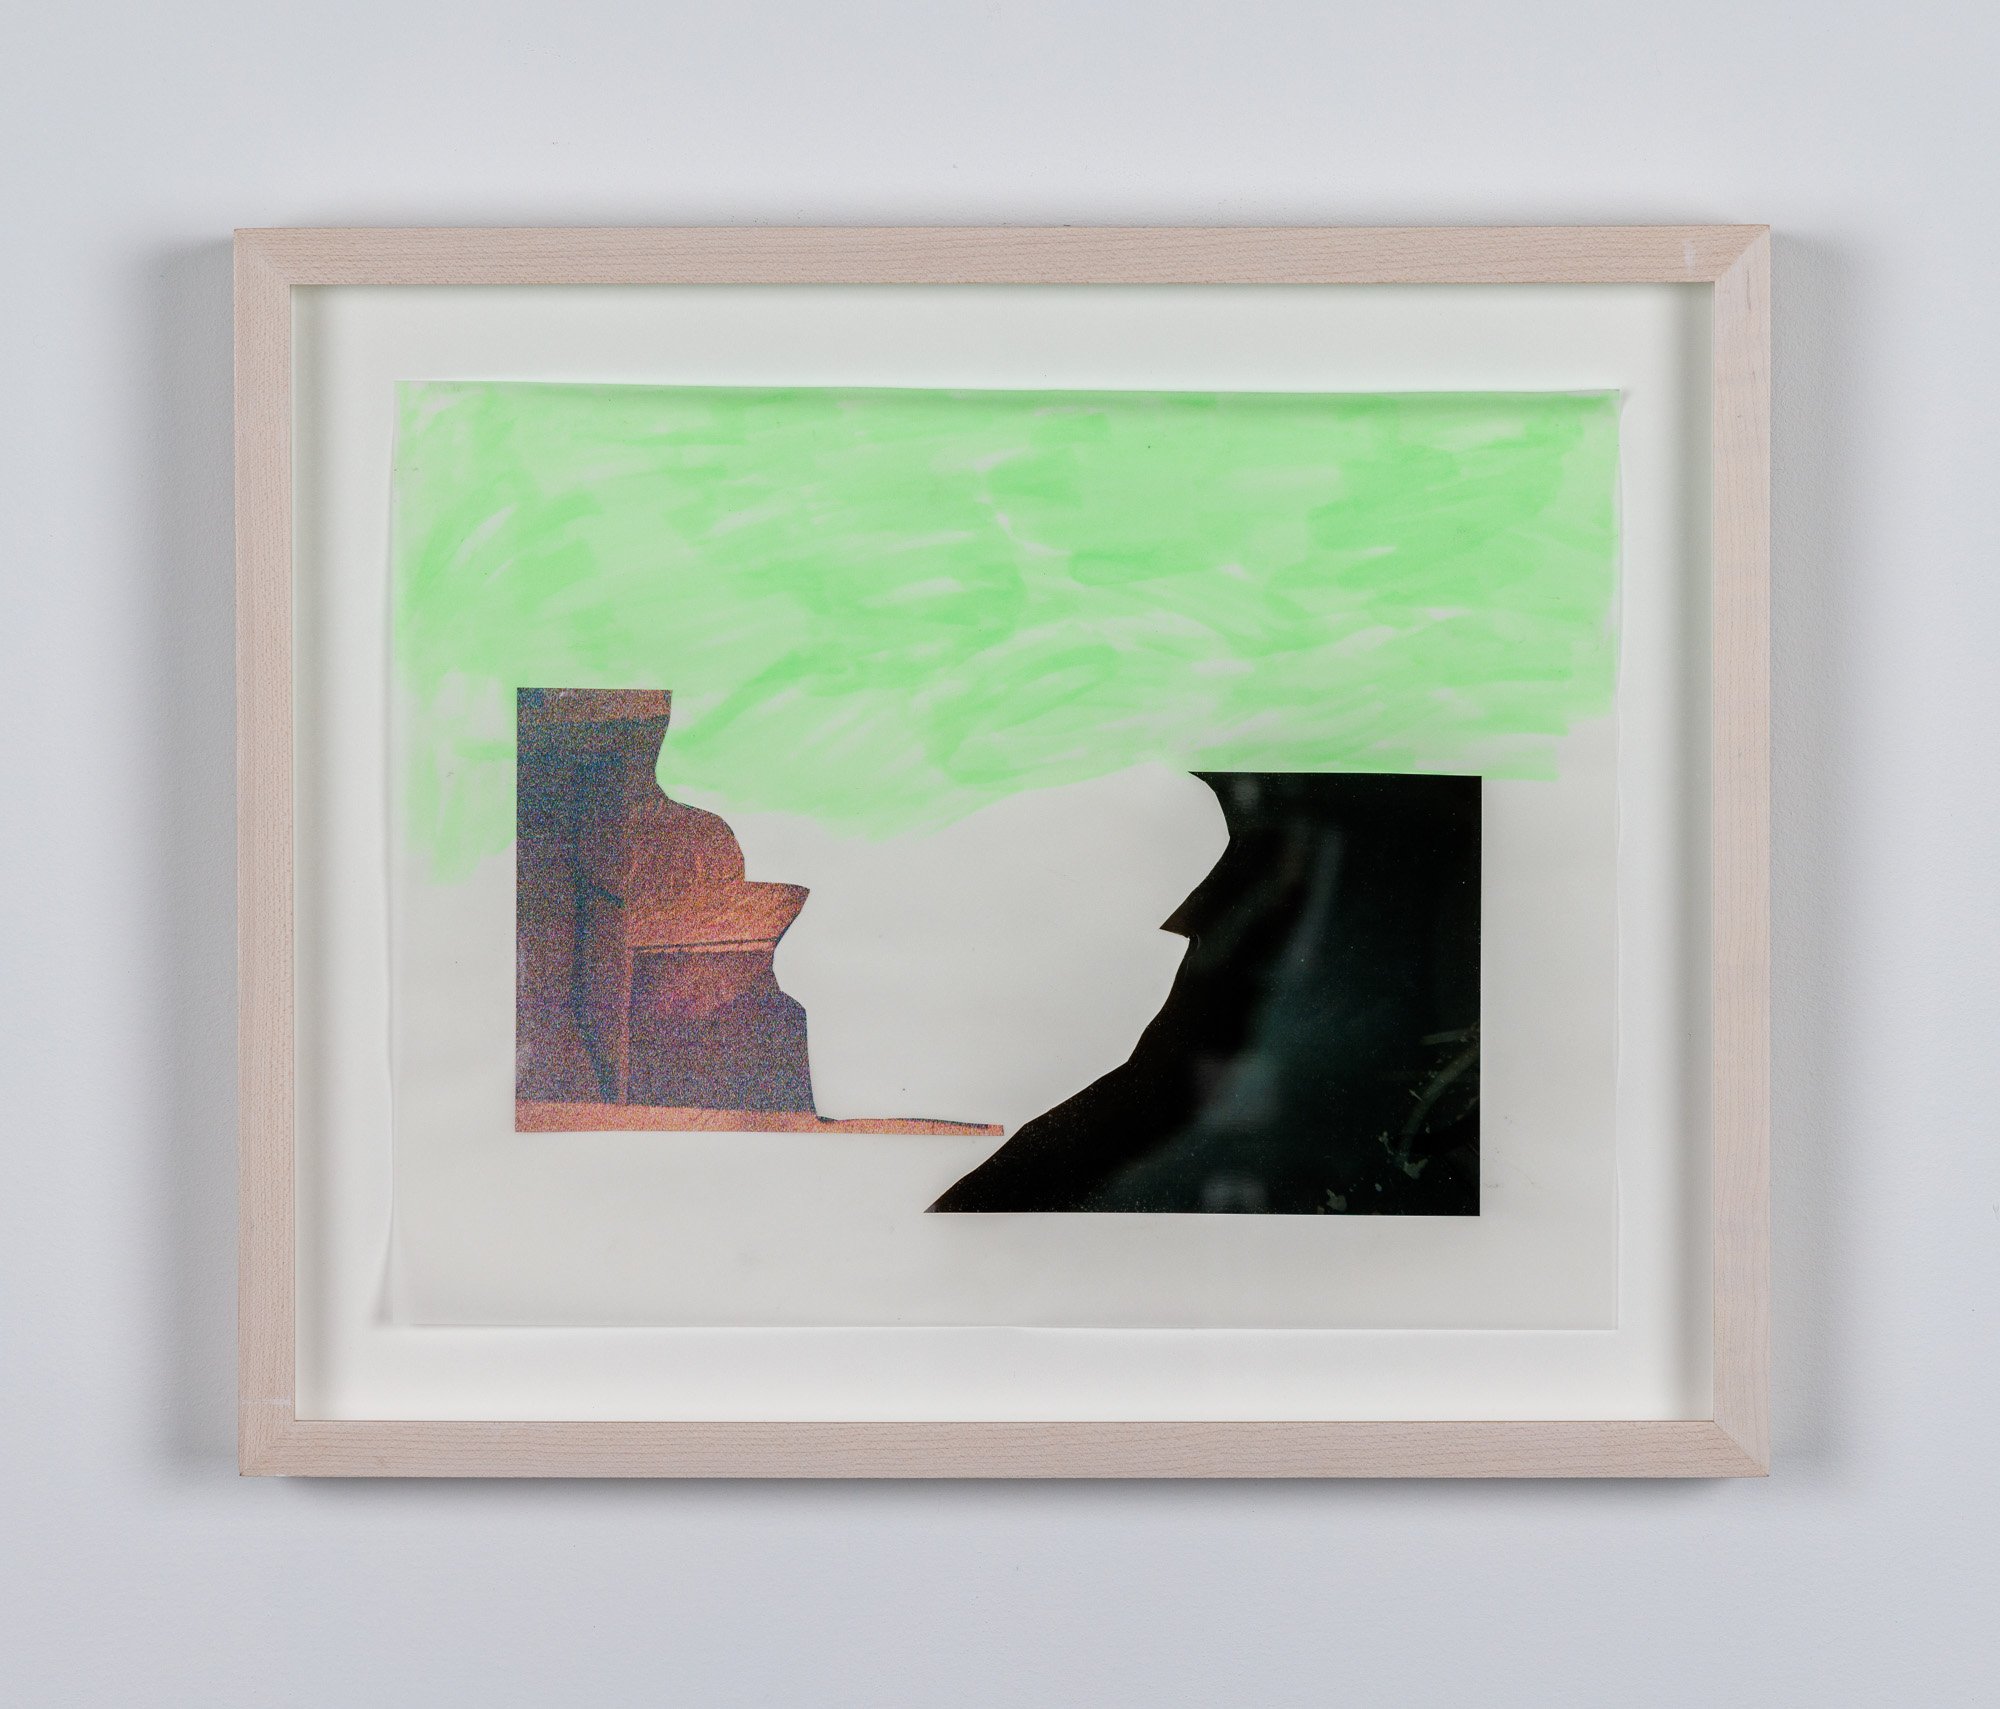  Laura Hunt,  Untitled (face or vase, landscape) , 2019, photo collage and fabric marker on vellum, framed, 11.25 x 13.75 inches. 